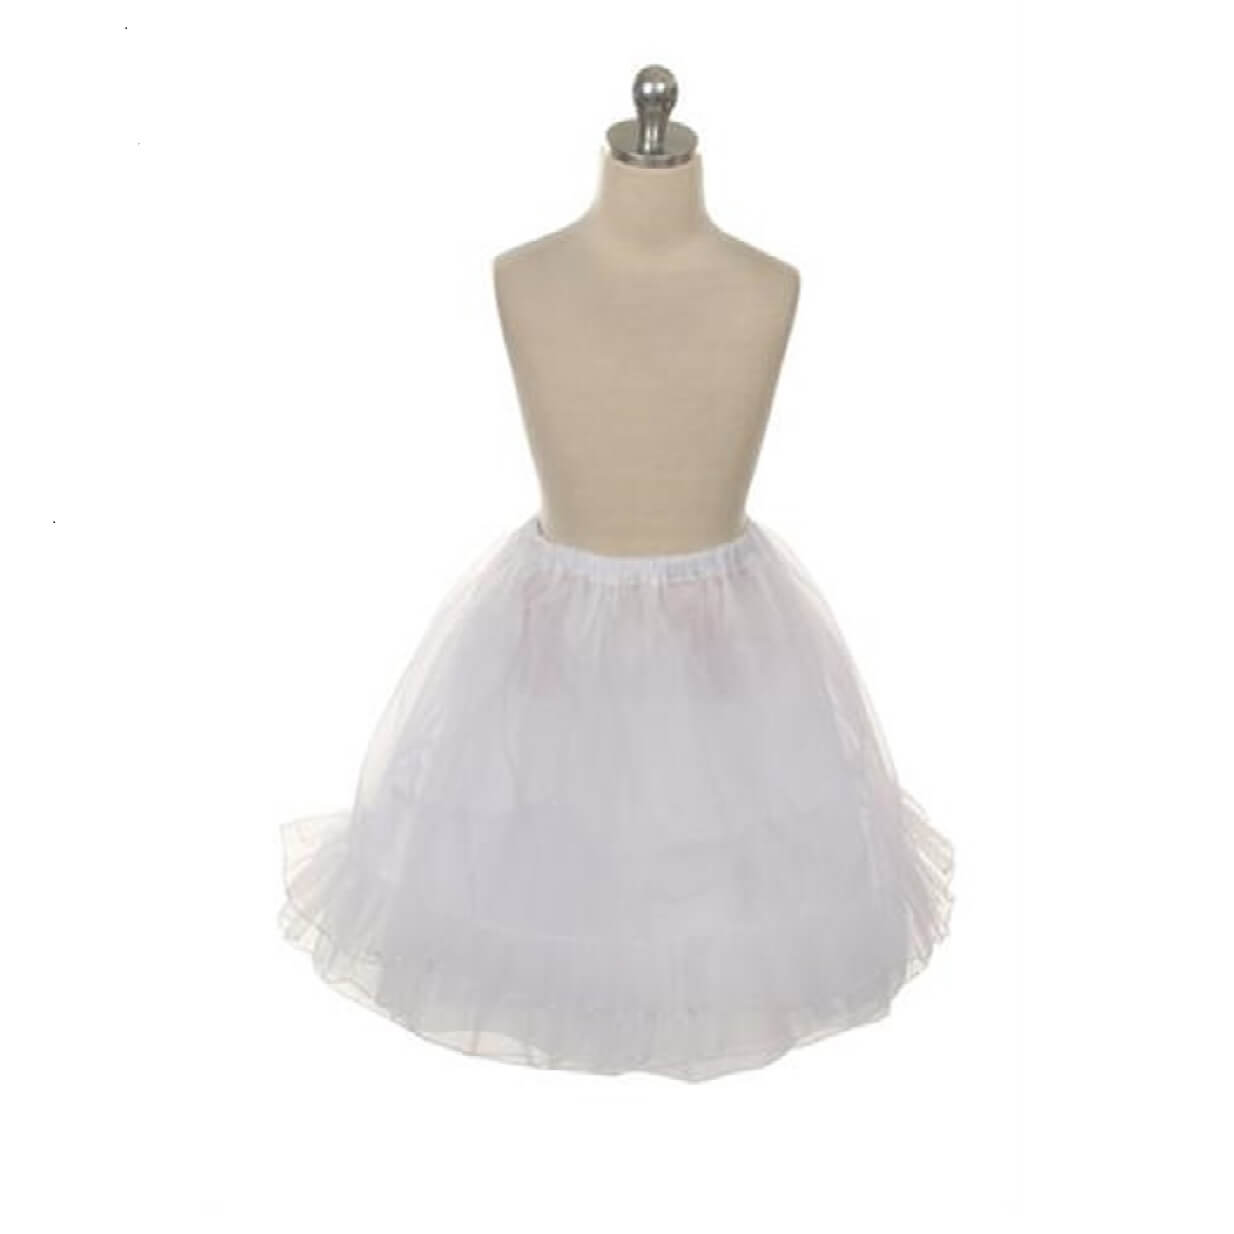 Girls Triple Layered White Petticoat on a mannequin